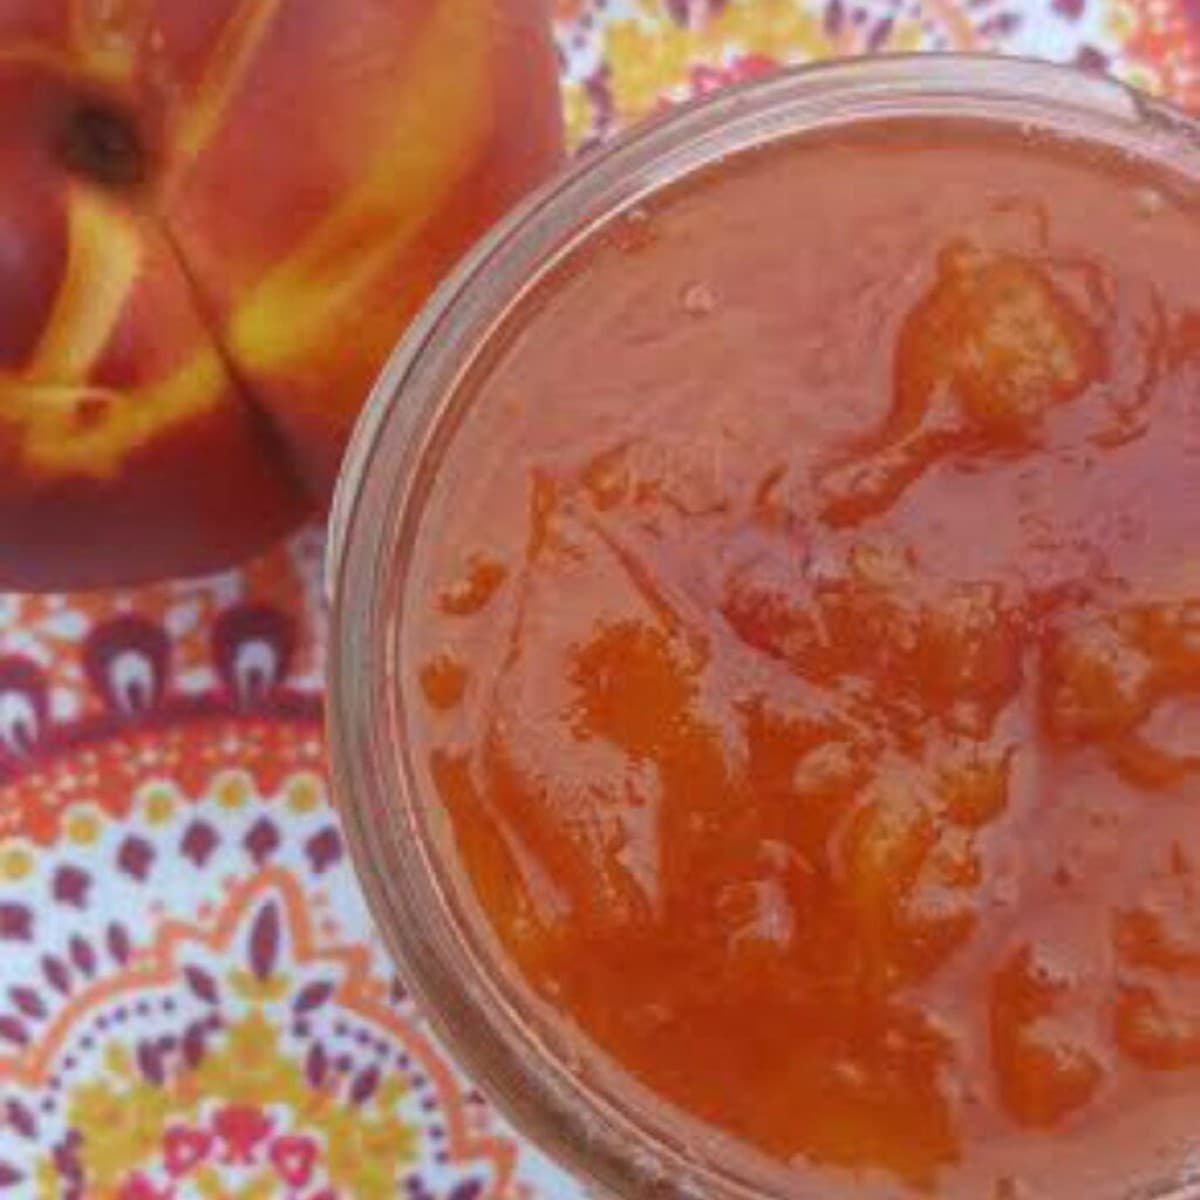 A close-up photo of a jar of nectarine jam on a table. The jam is a deep orange color and has a slightly glossy sheen. The jar is labeled "Nectarine Jam" and has a lid. 